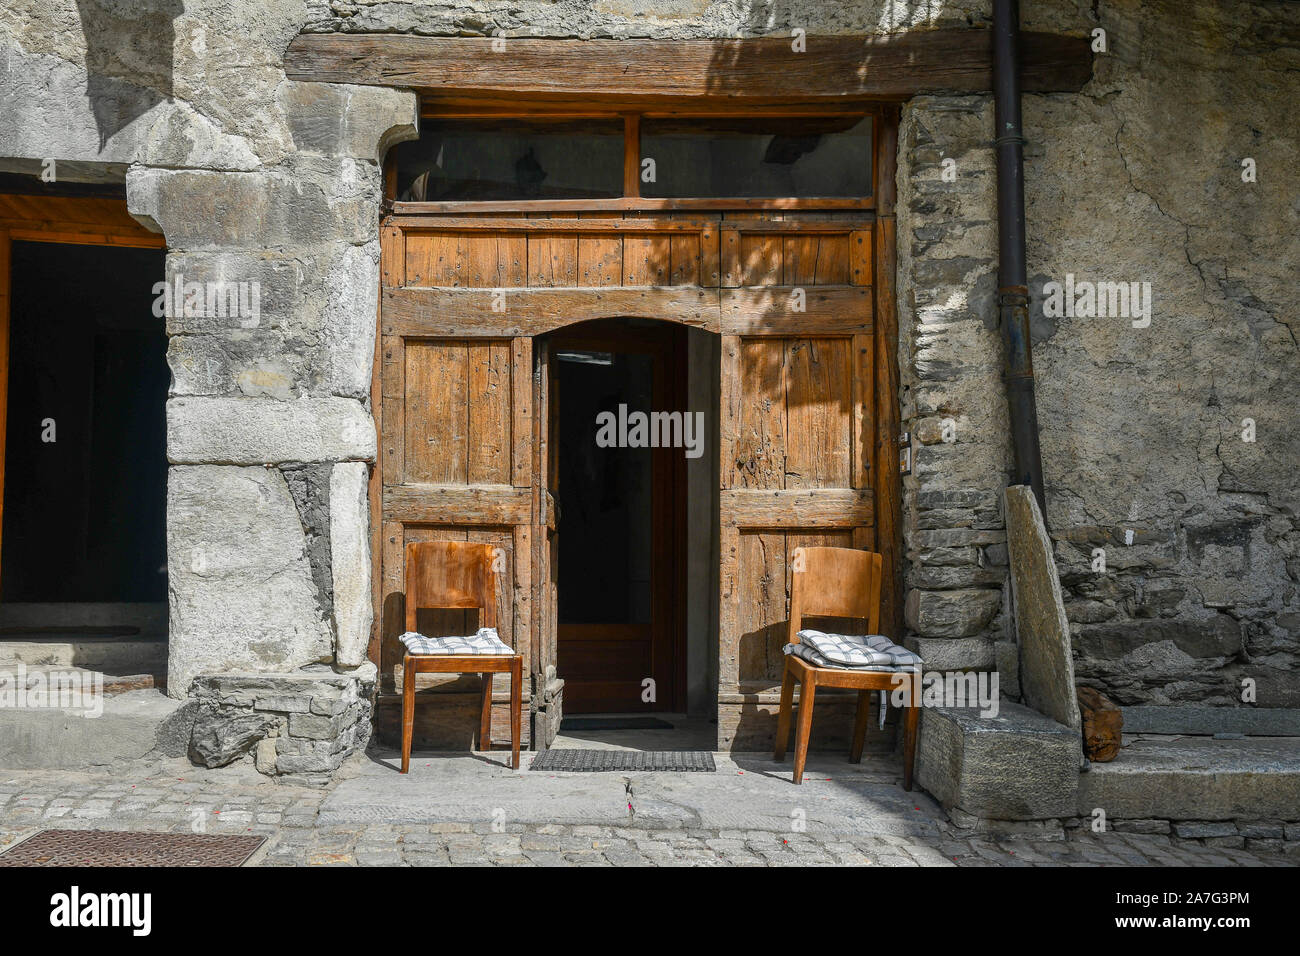 Exterior of an old stone house in the Alpine village of Chianale, one of the Most Beautiful Villages of Italy, Varaita Valley, Cuneo, Piedmont, Italy Stock Photo